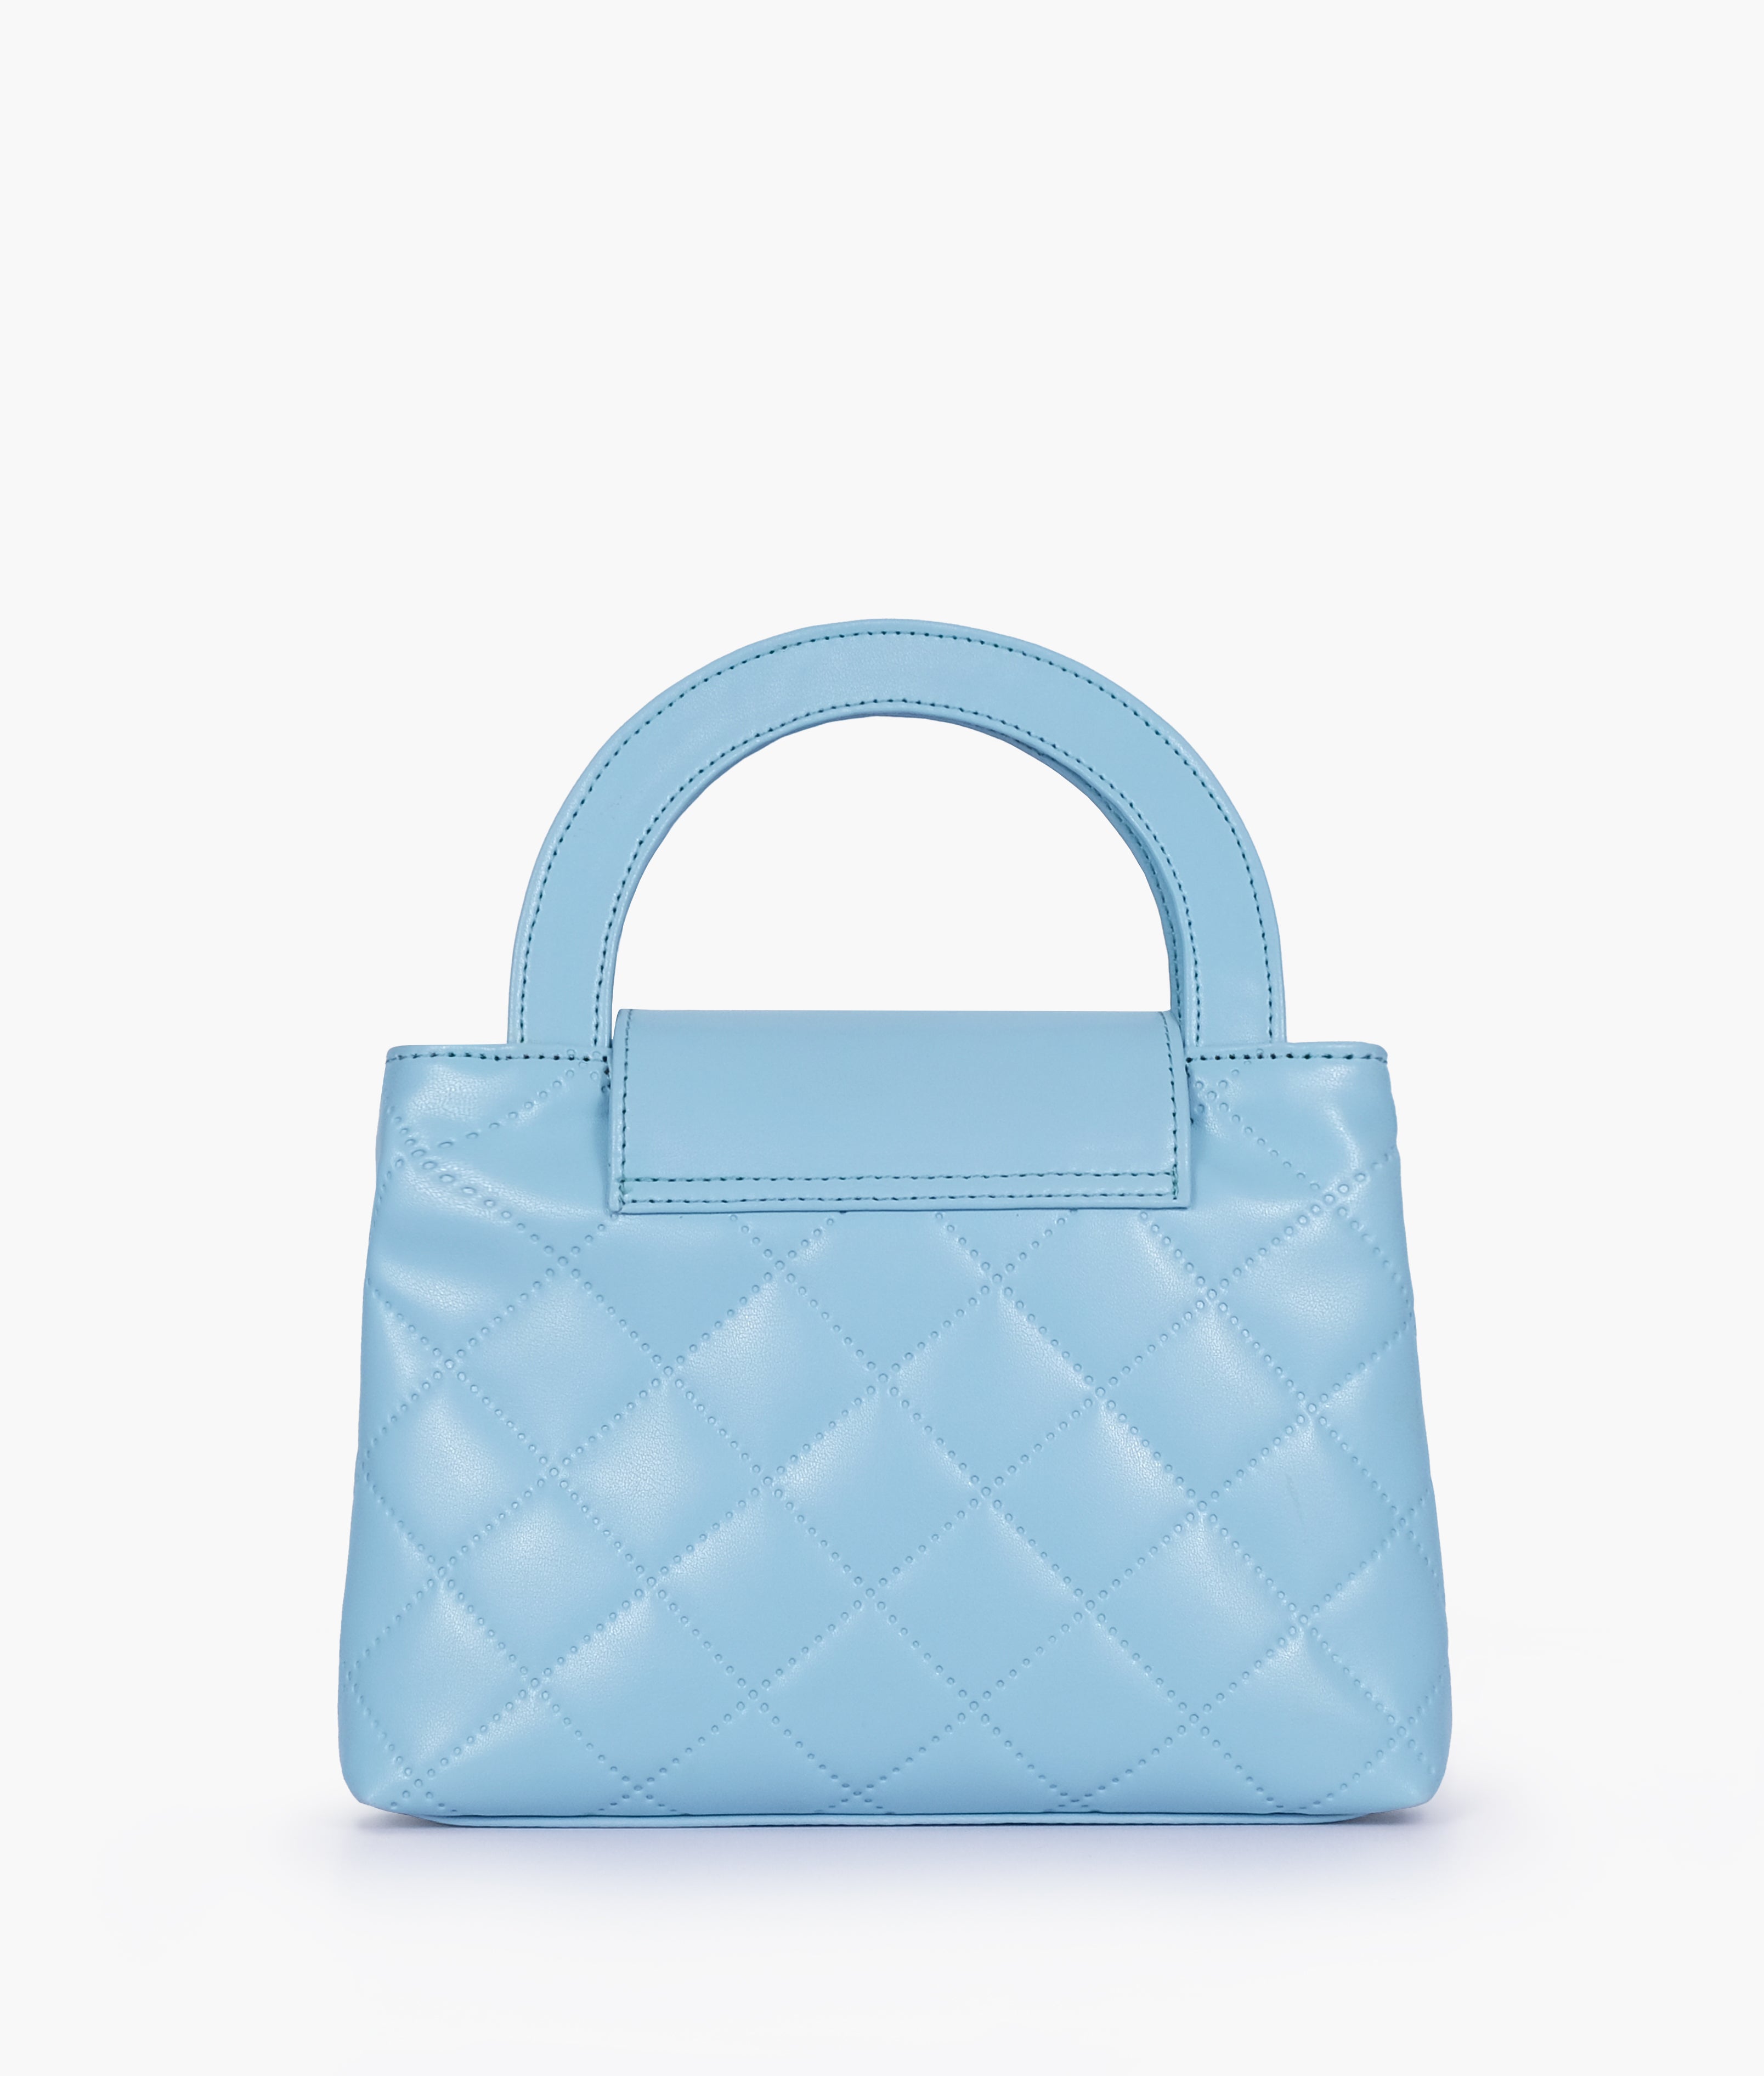 Sky blue flap quilted bag with top handle